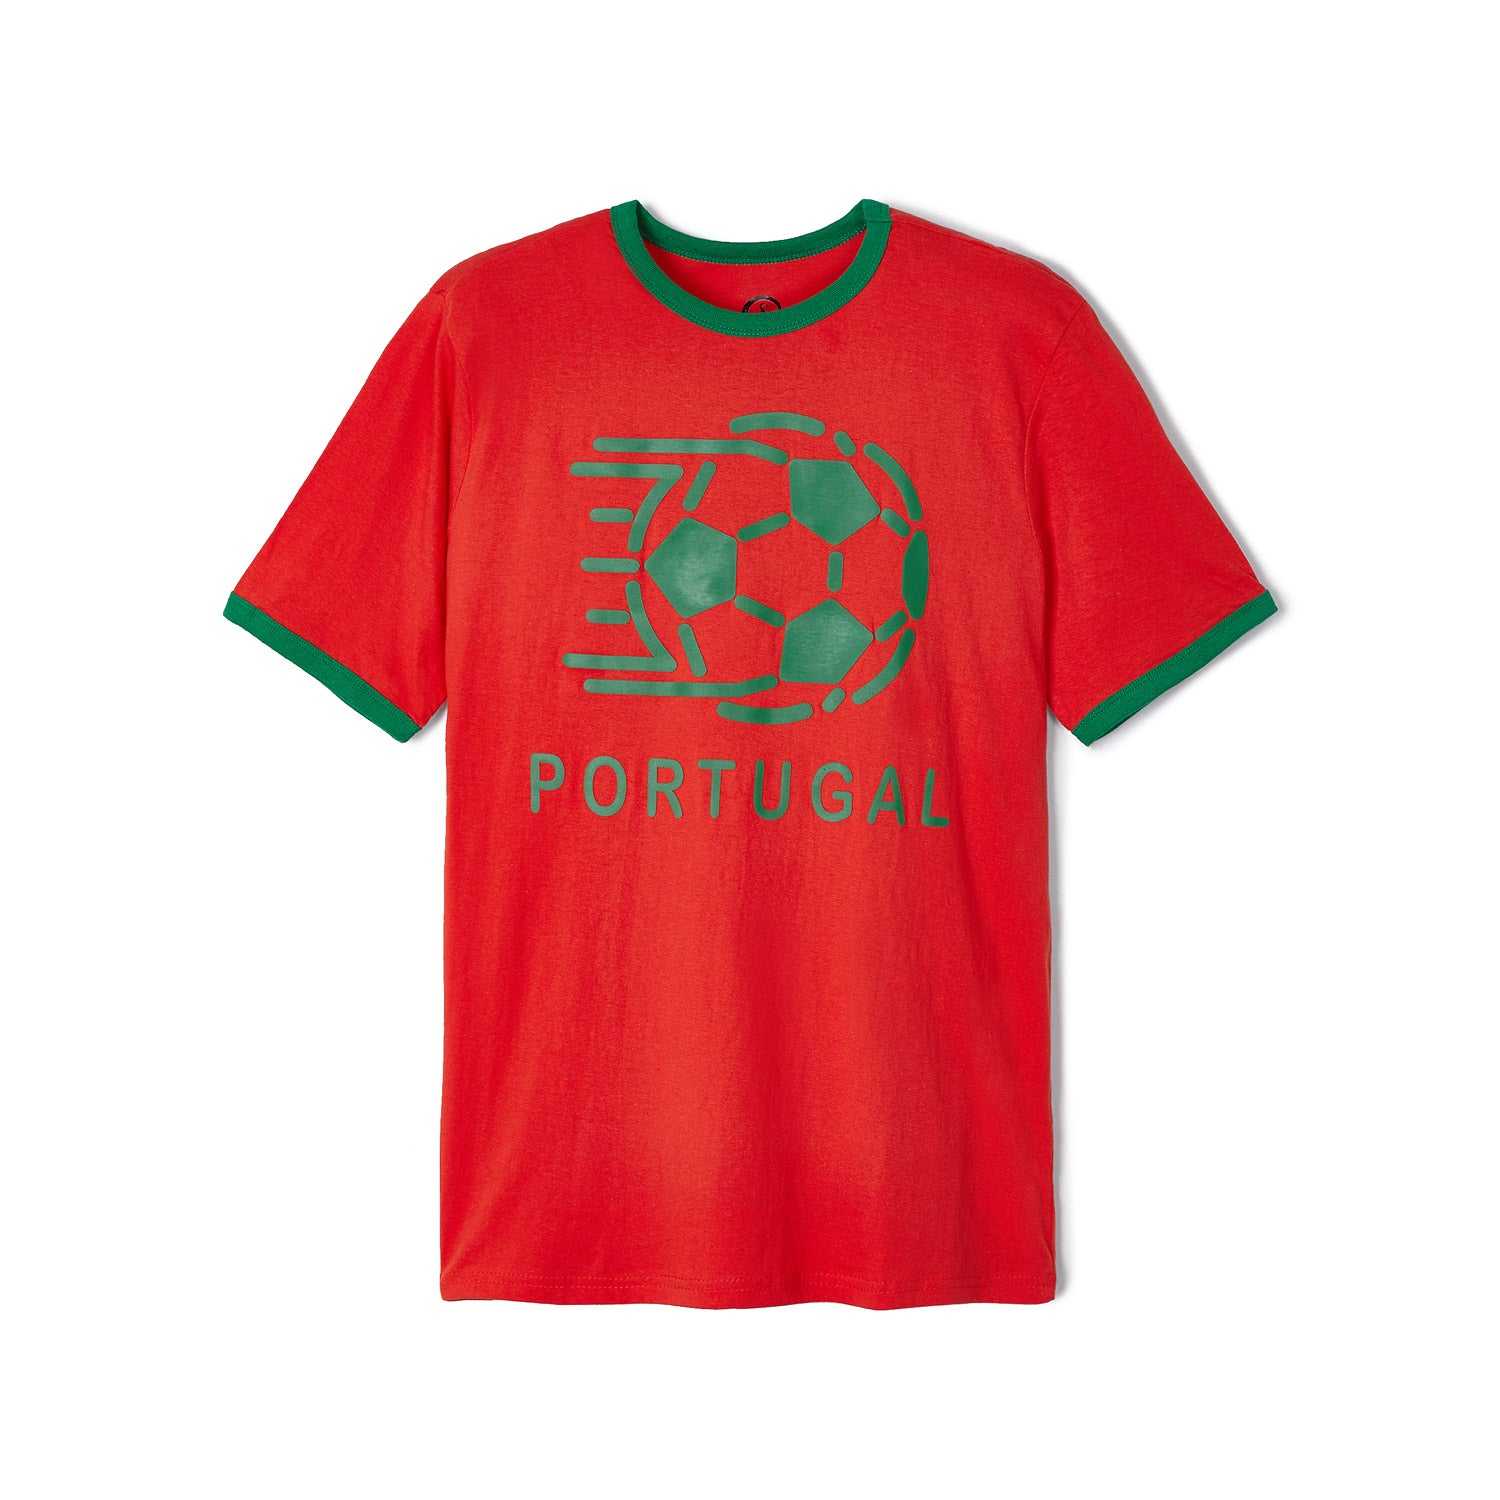 2022 World Cup Portugal Ringer Red T-Shirt - Men's